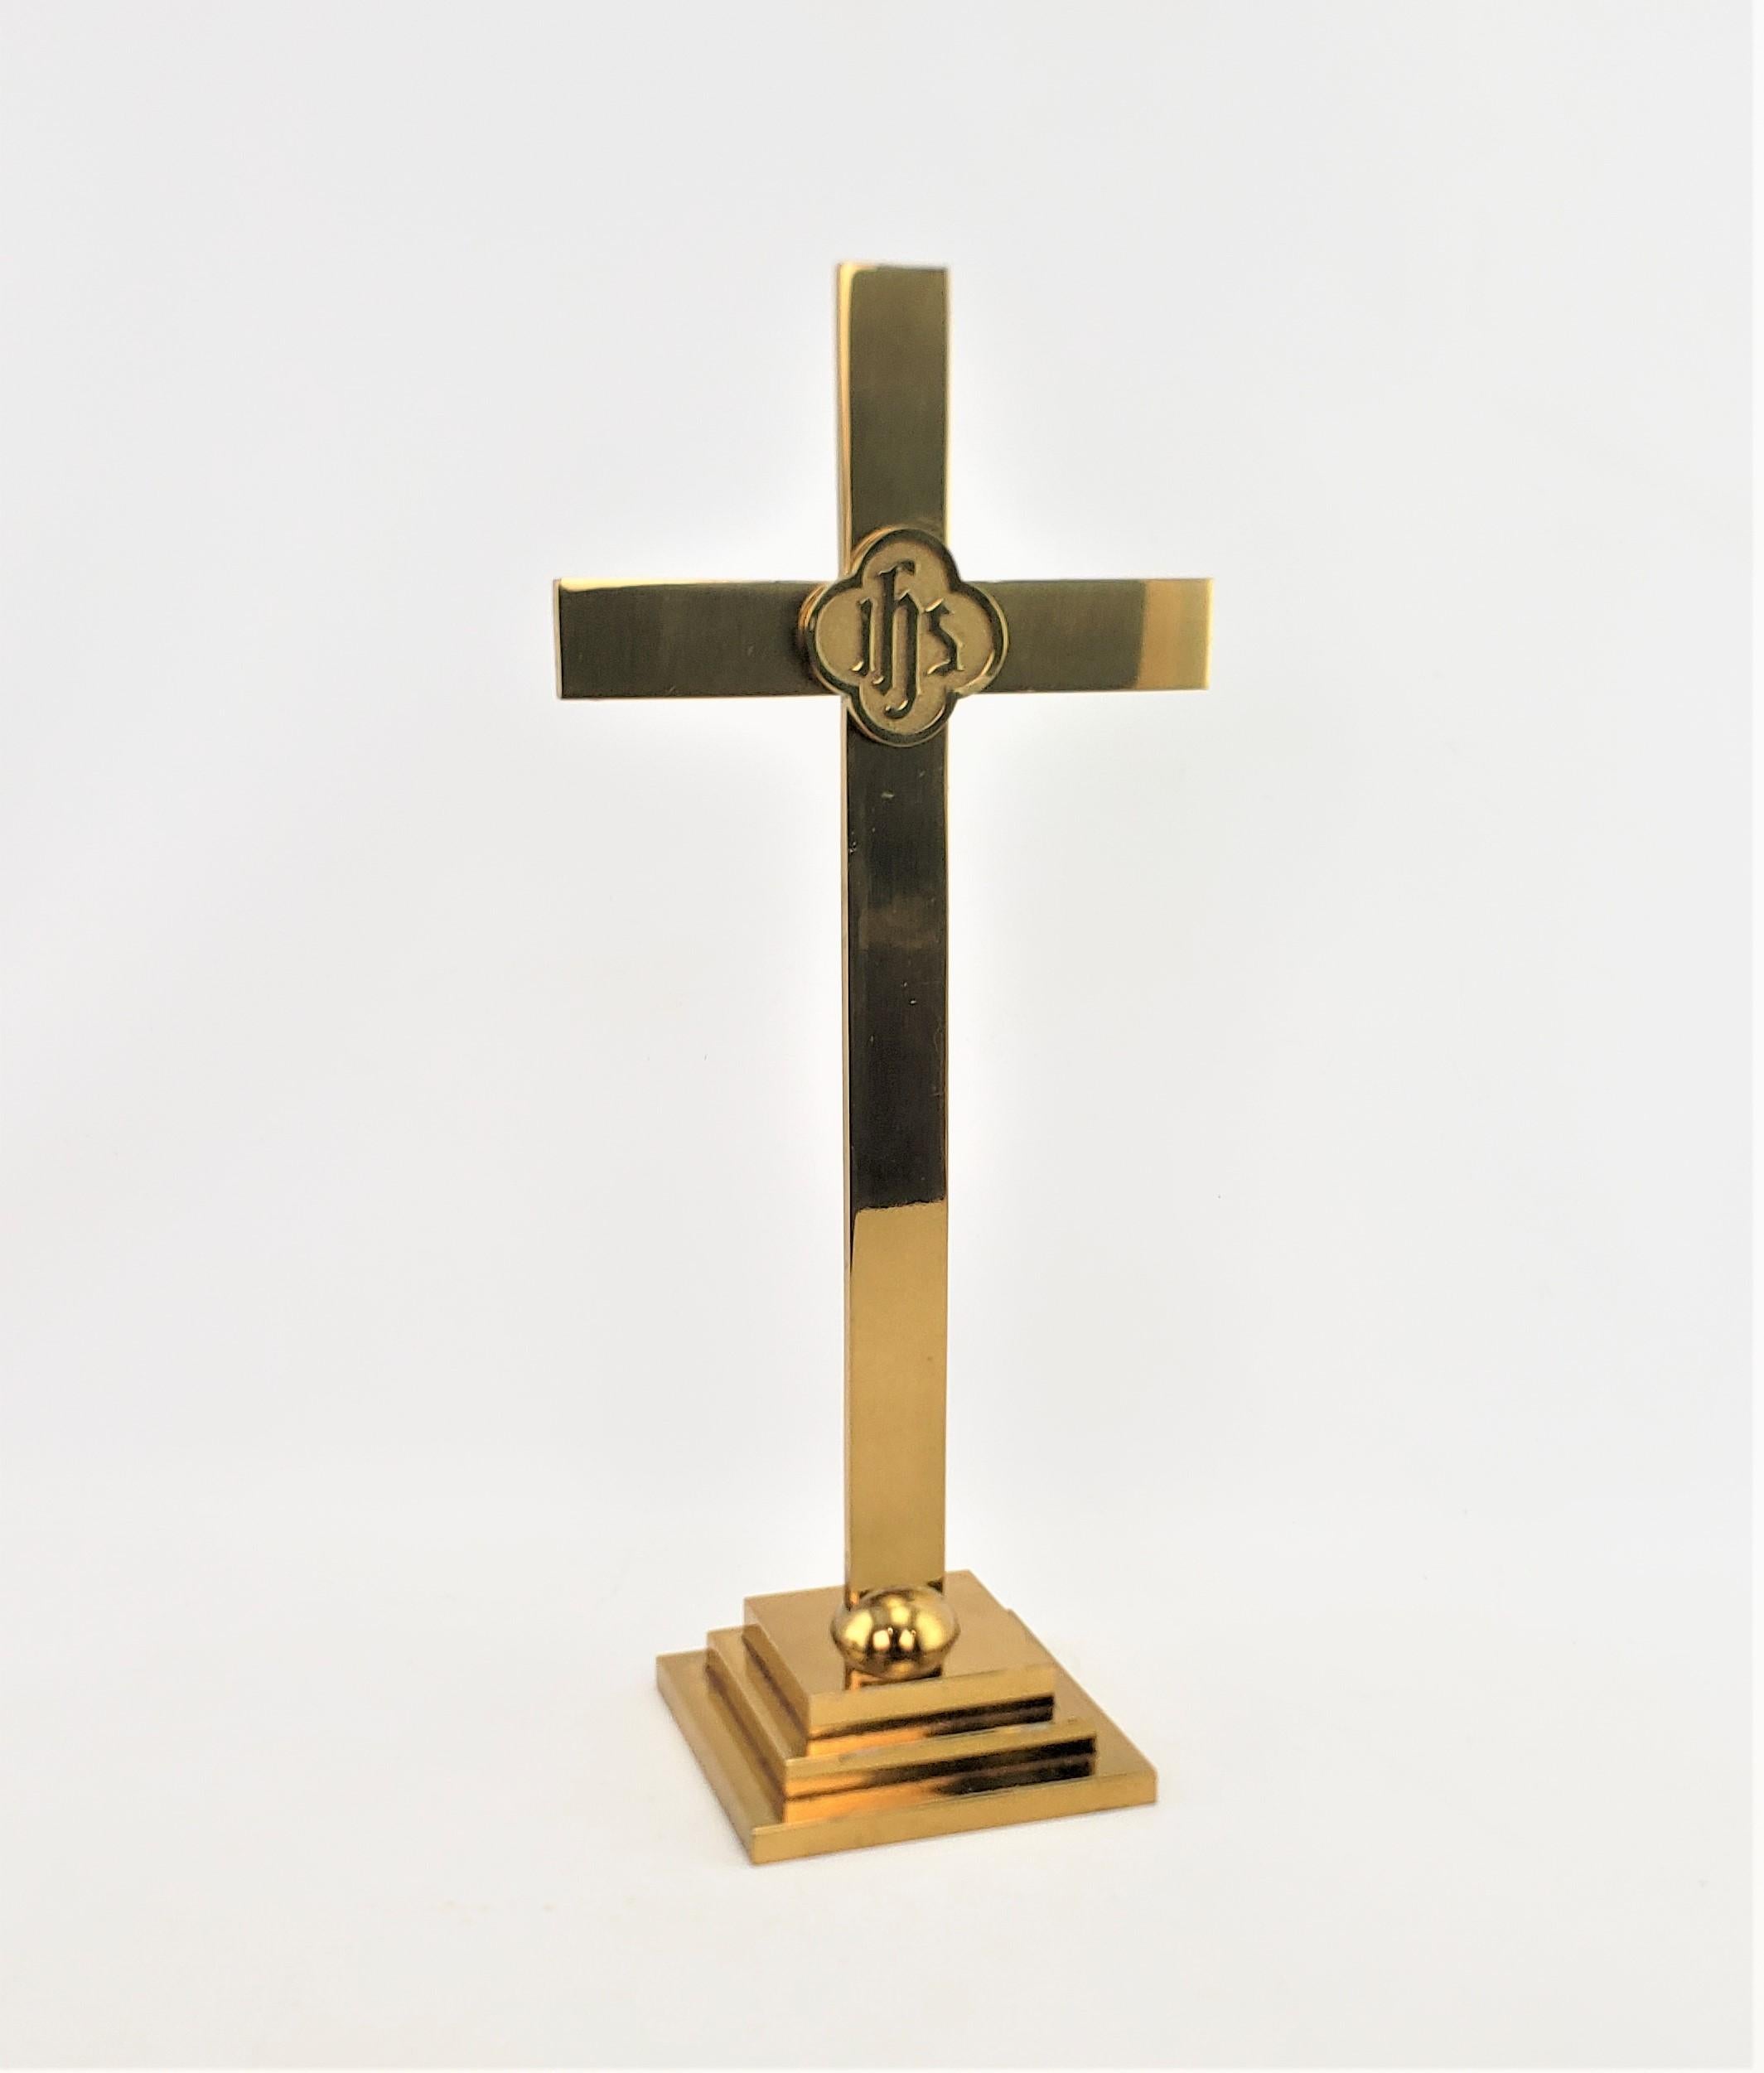 This large brass and brass plated church cross was made by Sudbury, presumably of the United States, in approximately 1970 in a Mid-Century Modern style. The cross is believed to be composed of solid brass, but was not tested, and the base appears